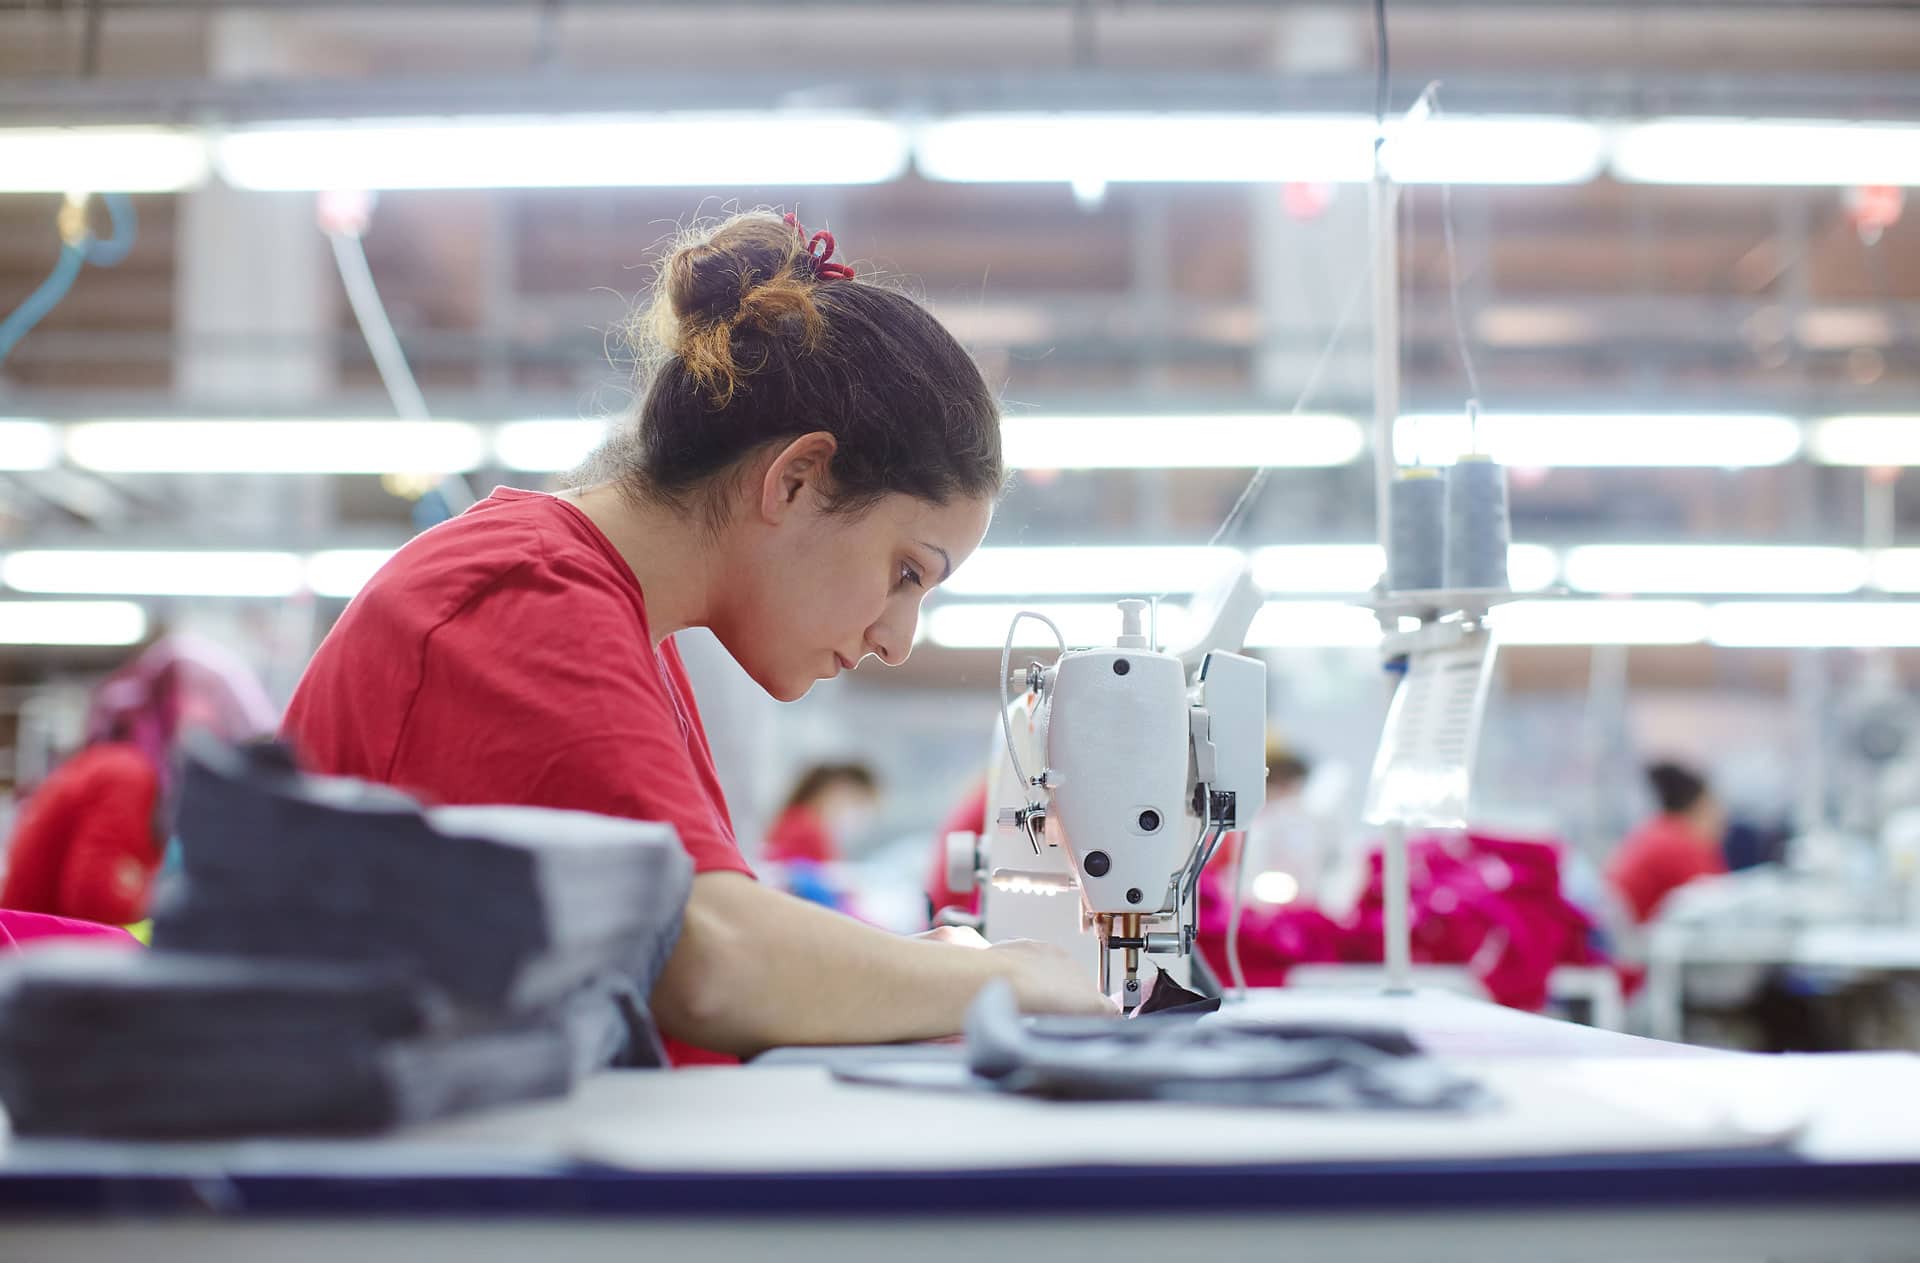 Production of corporate fashion in Turkey